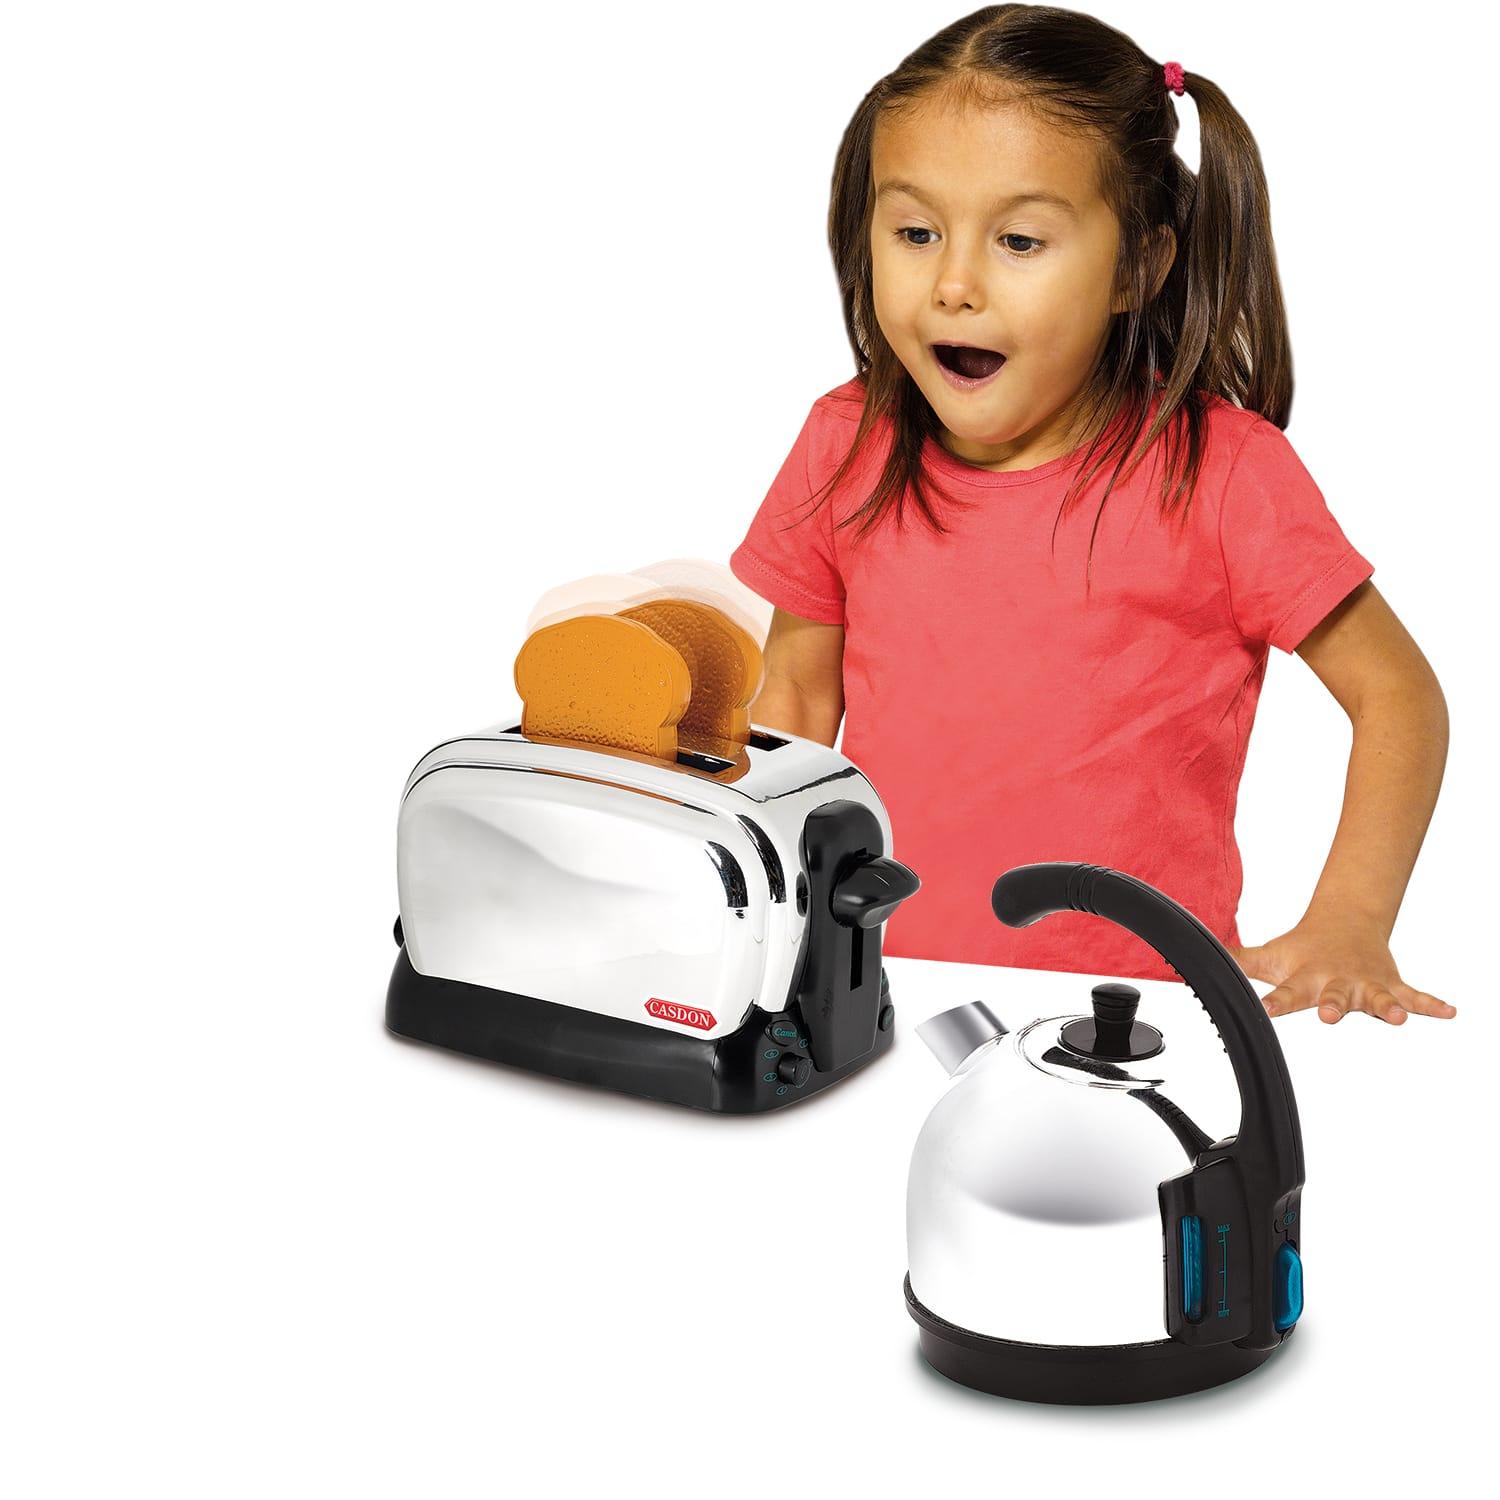 play kettle and toaster